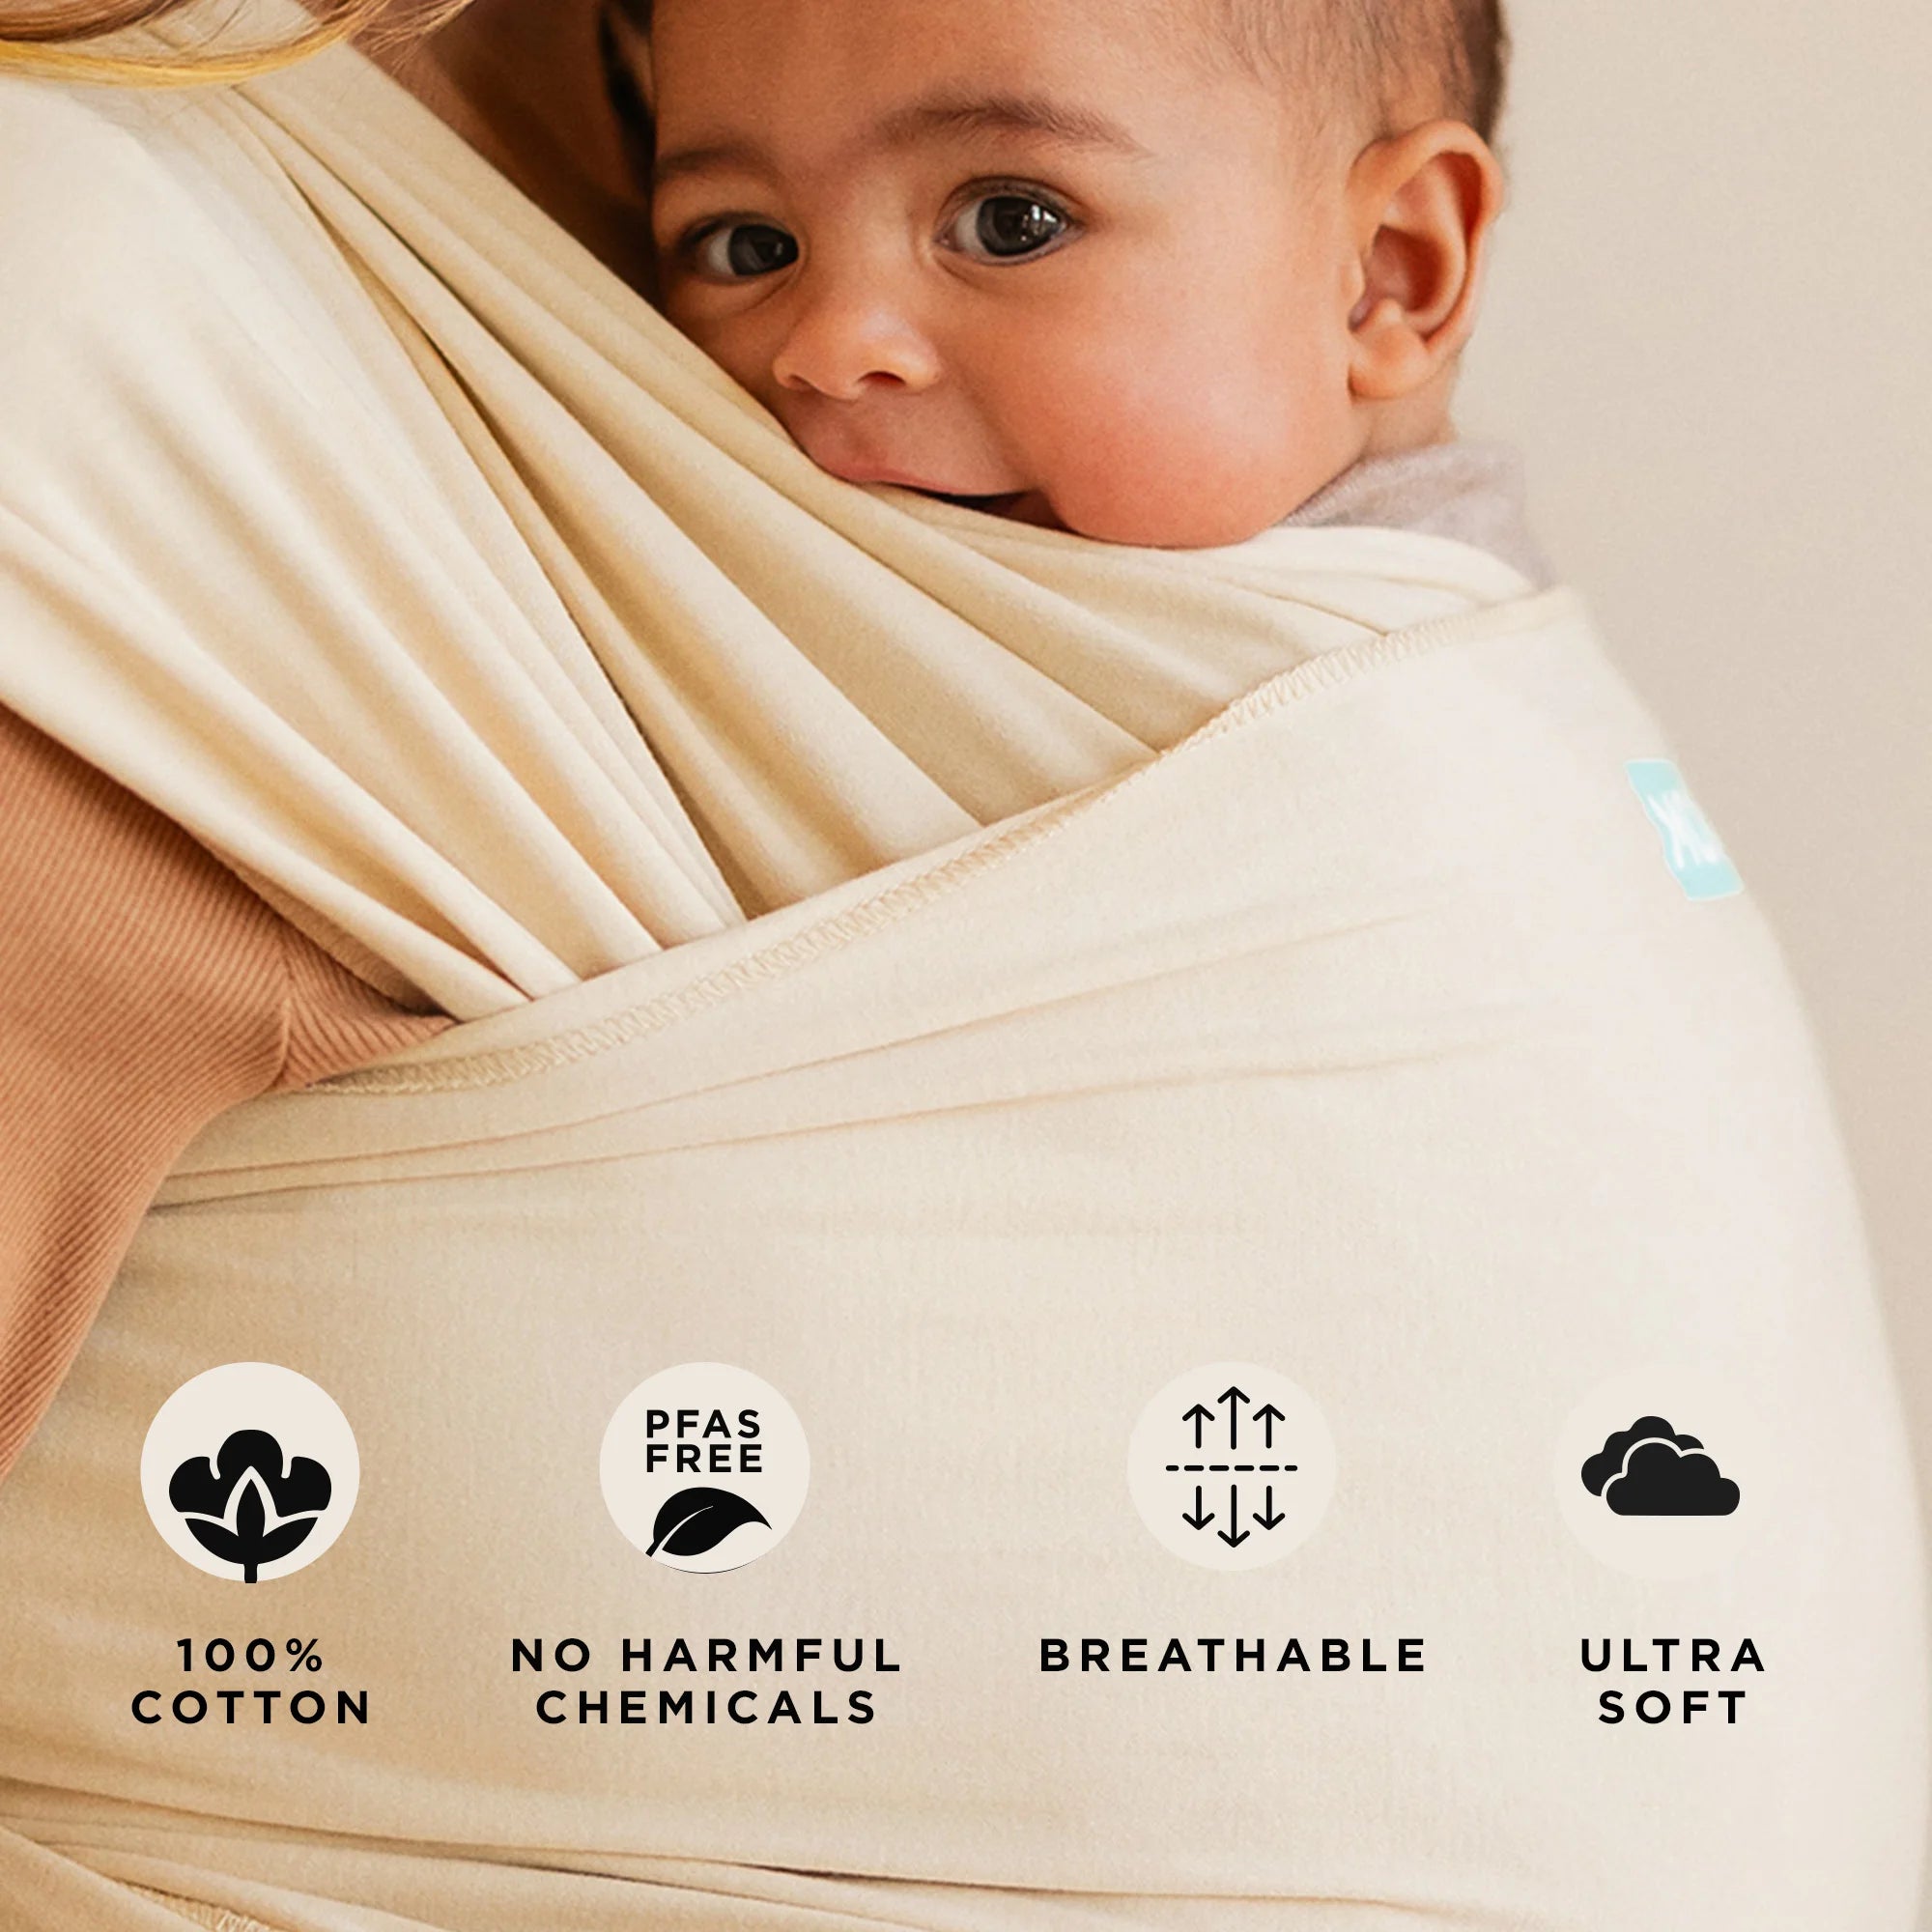 classic baby wrap in sand dollar is 100% cotton, no harmful chemicals and pfas free, breathable, and ultra soft